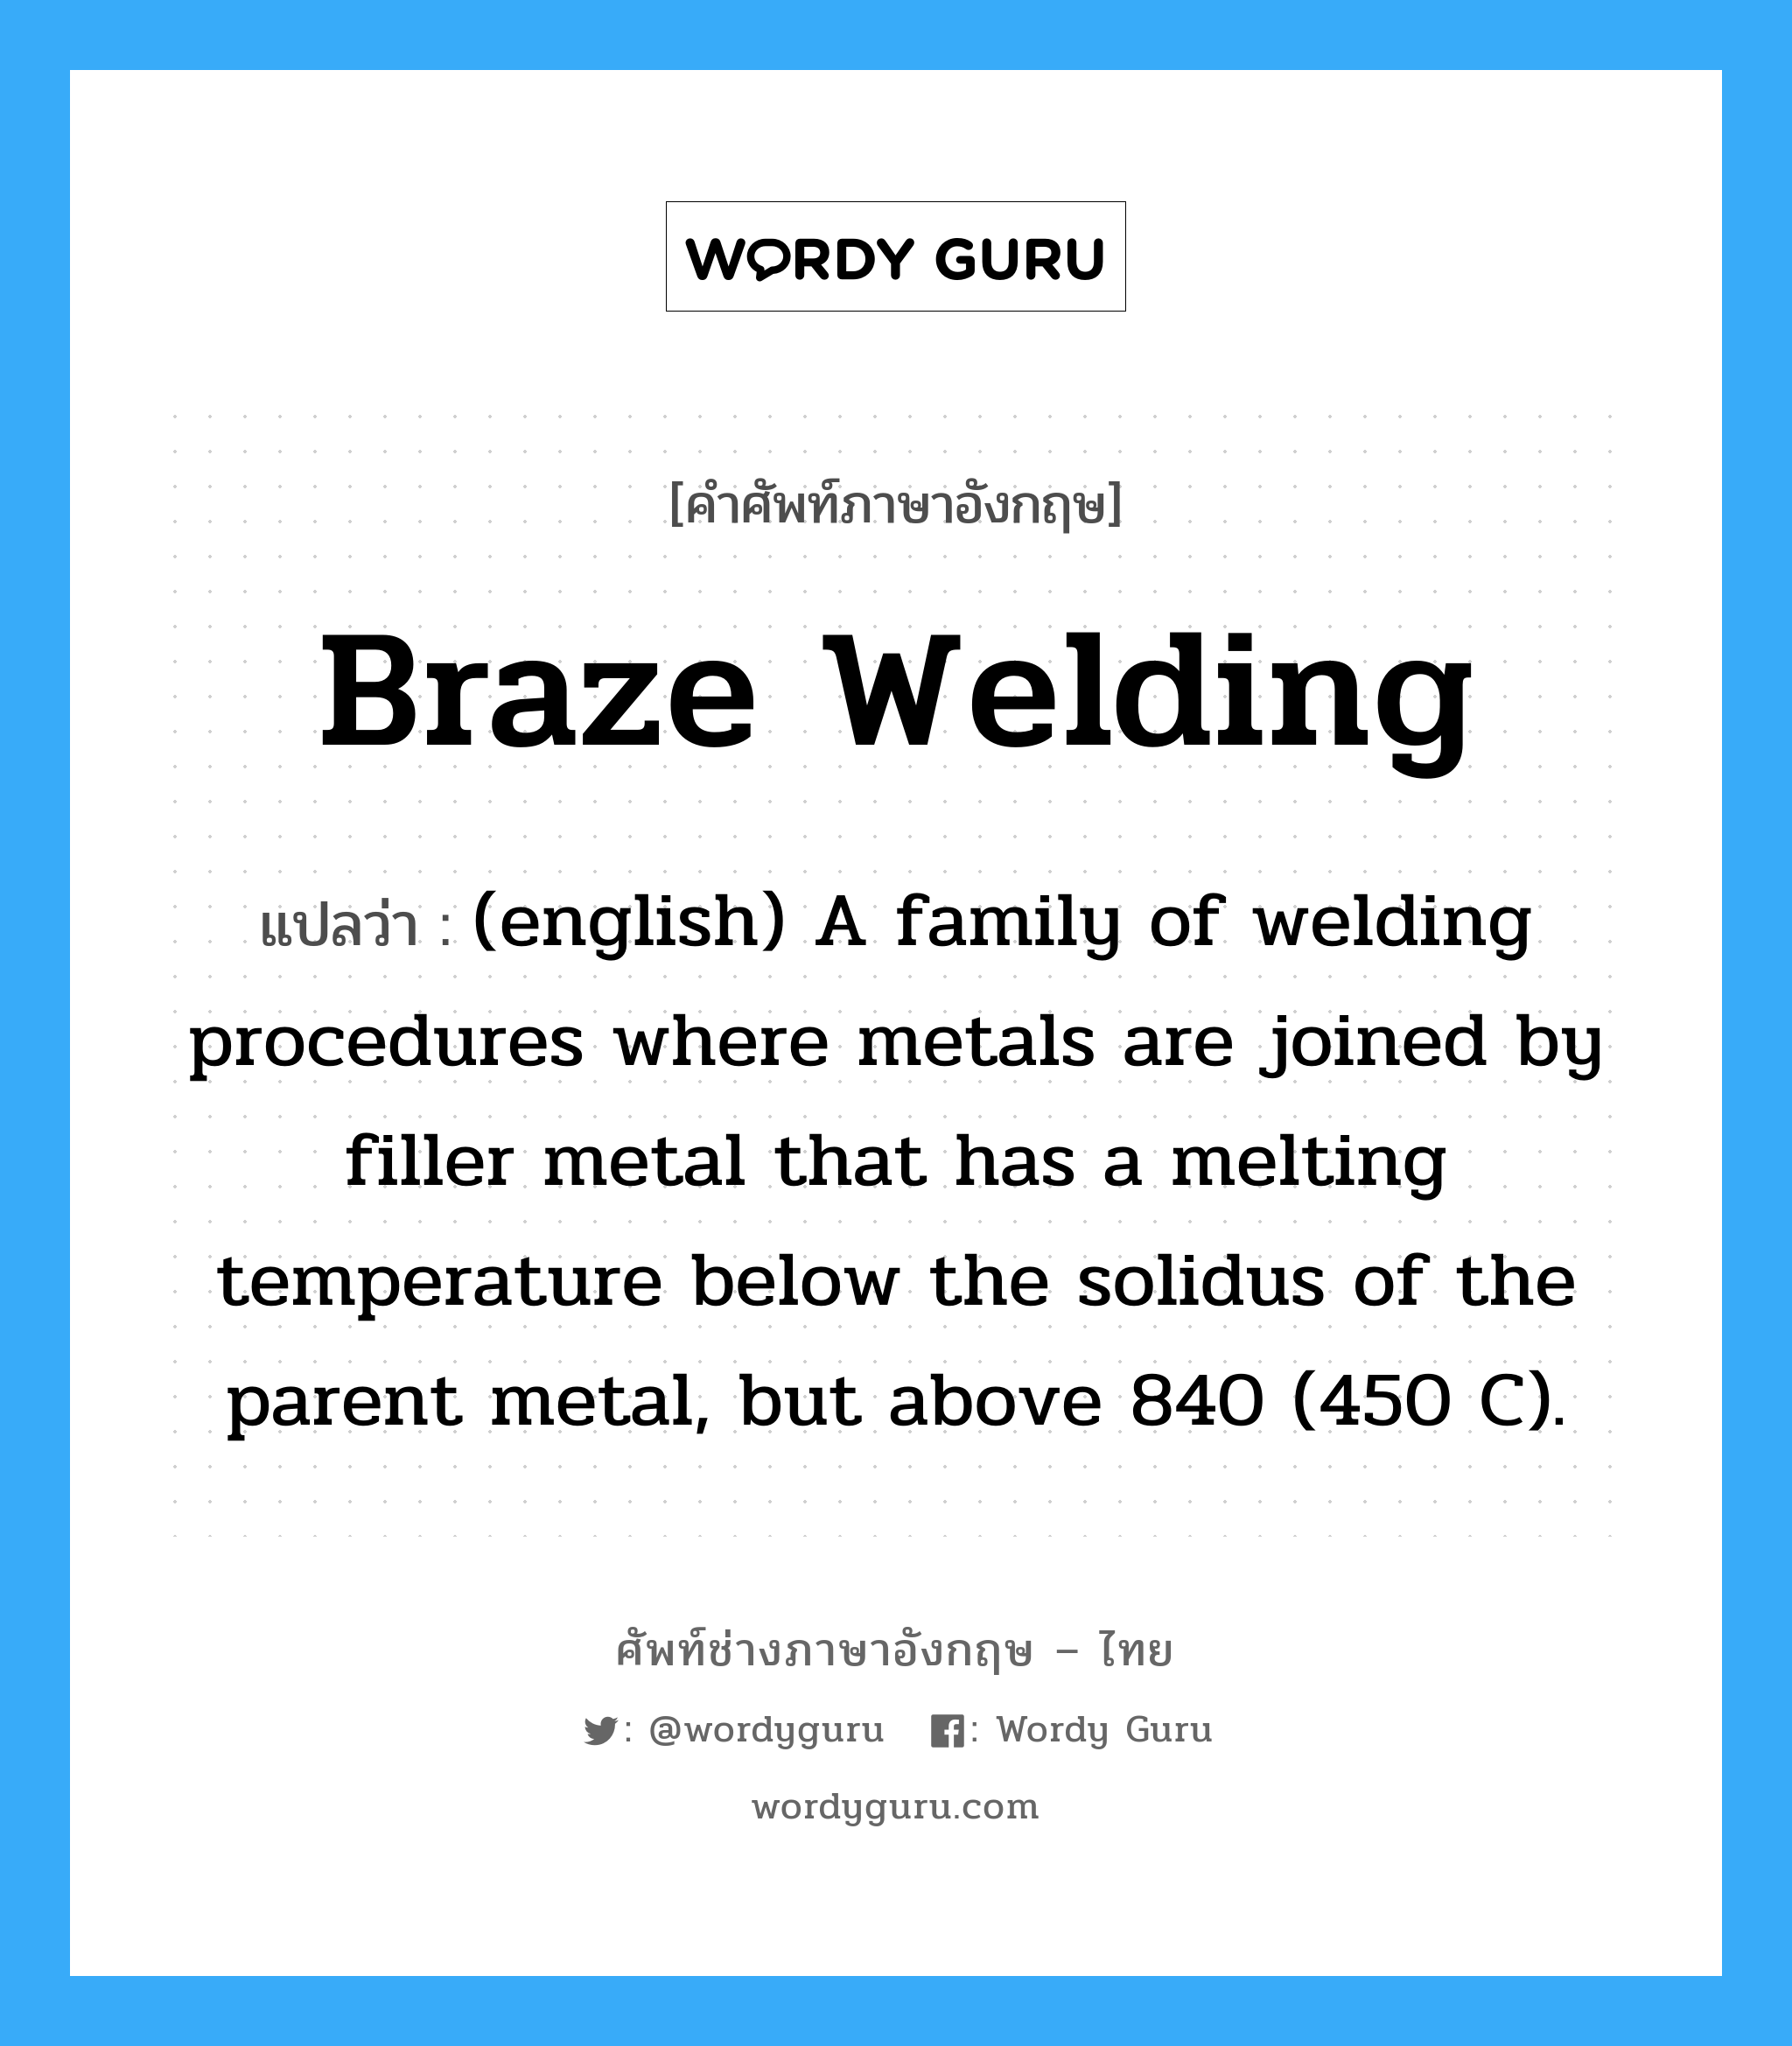 Braze Welding แปลว่า?, คำศัพท์ช่างภาษาอังกฤษ - ไทย Braze Welding คำศัพท์ภาษาอังกฤษ Braze Welding แปลว่า (english) A family of welding procedures where metals are joined by filler metal that has a melting temperature below the solidus of the parent metal, but above 840 (450 C).